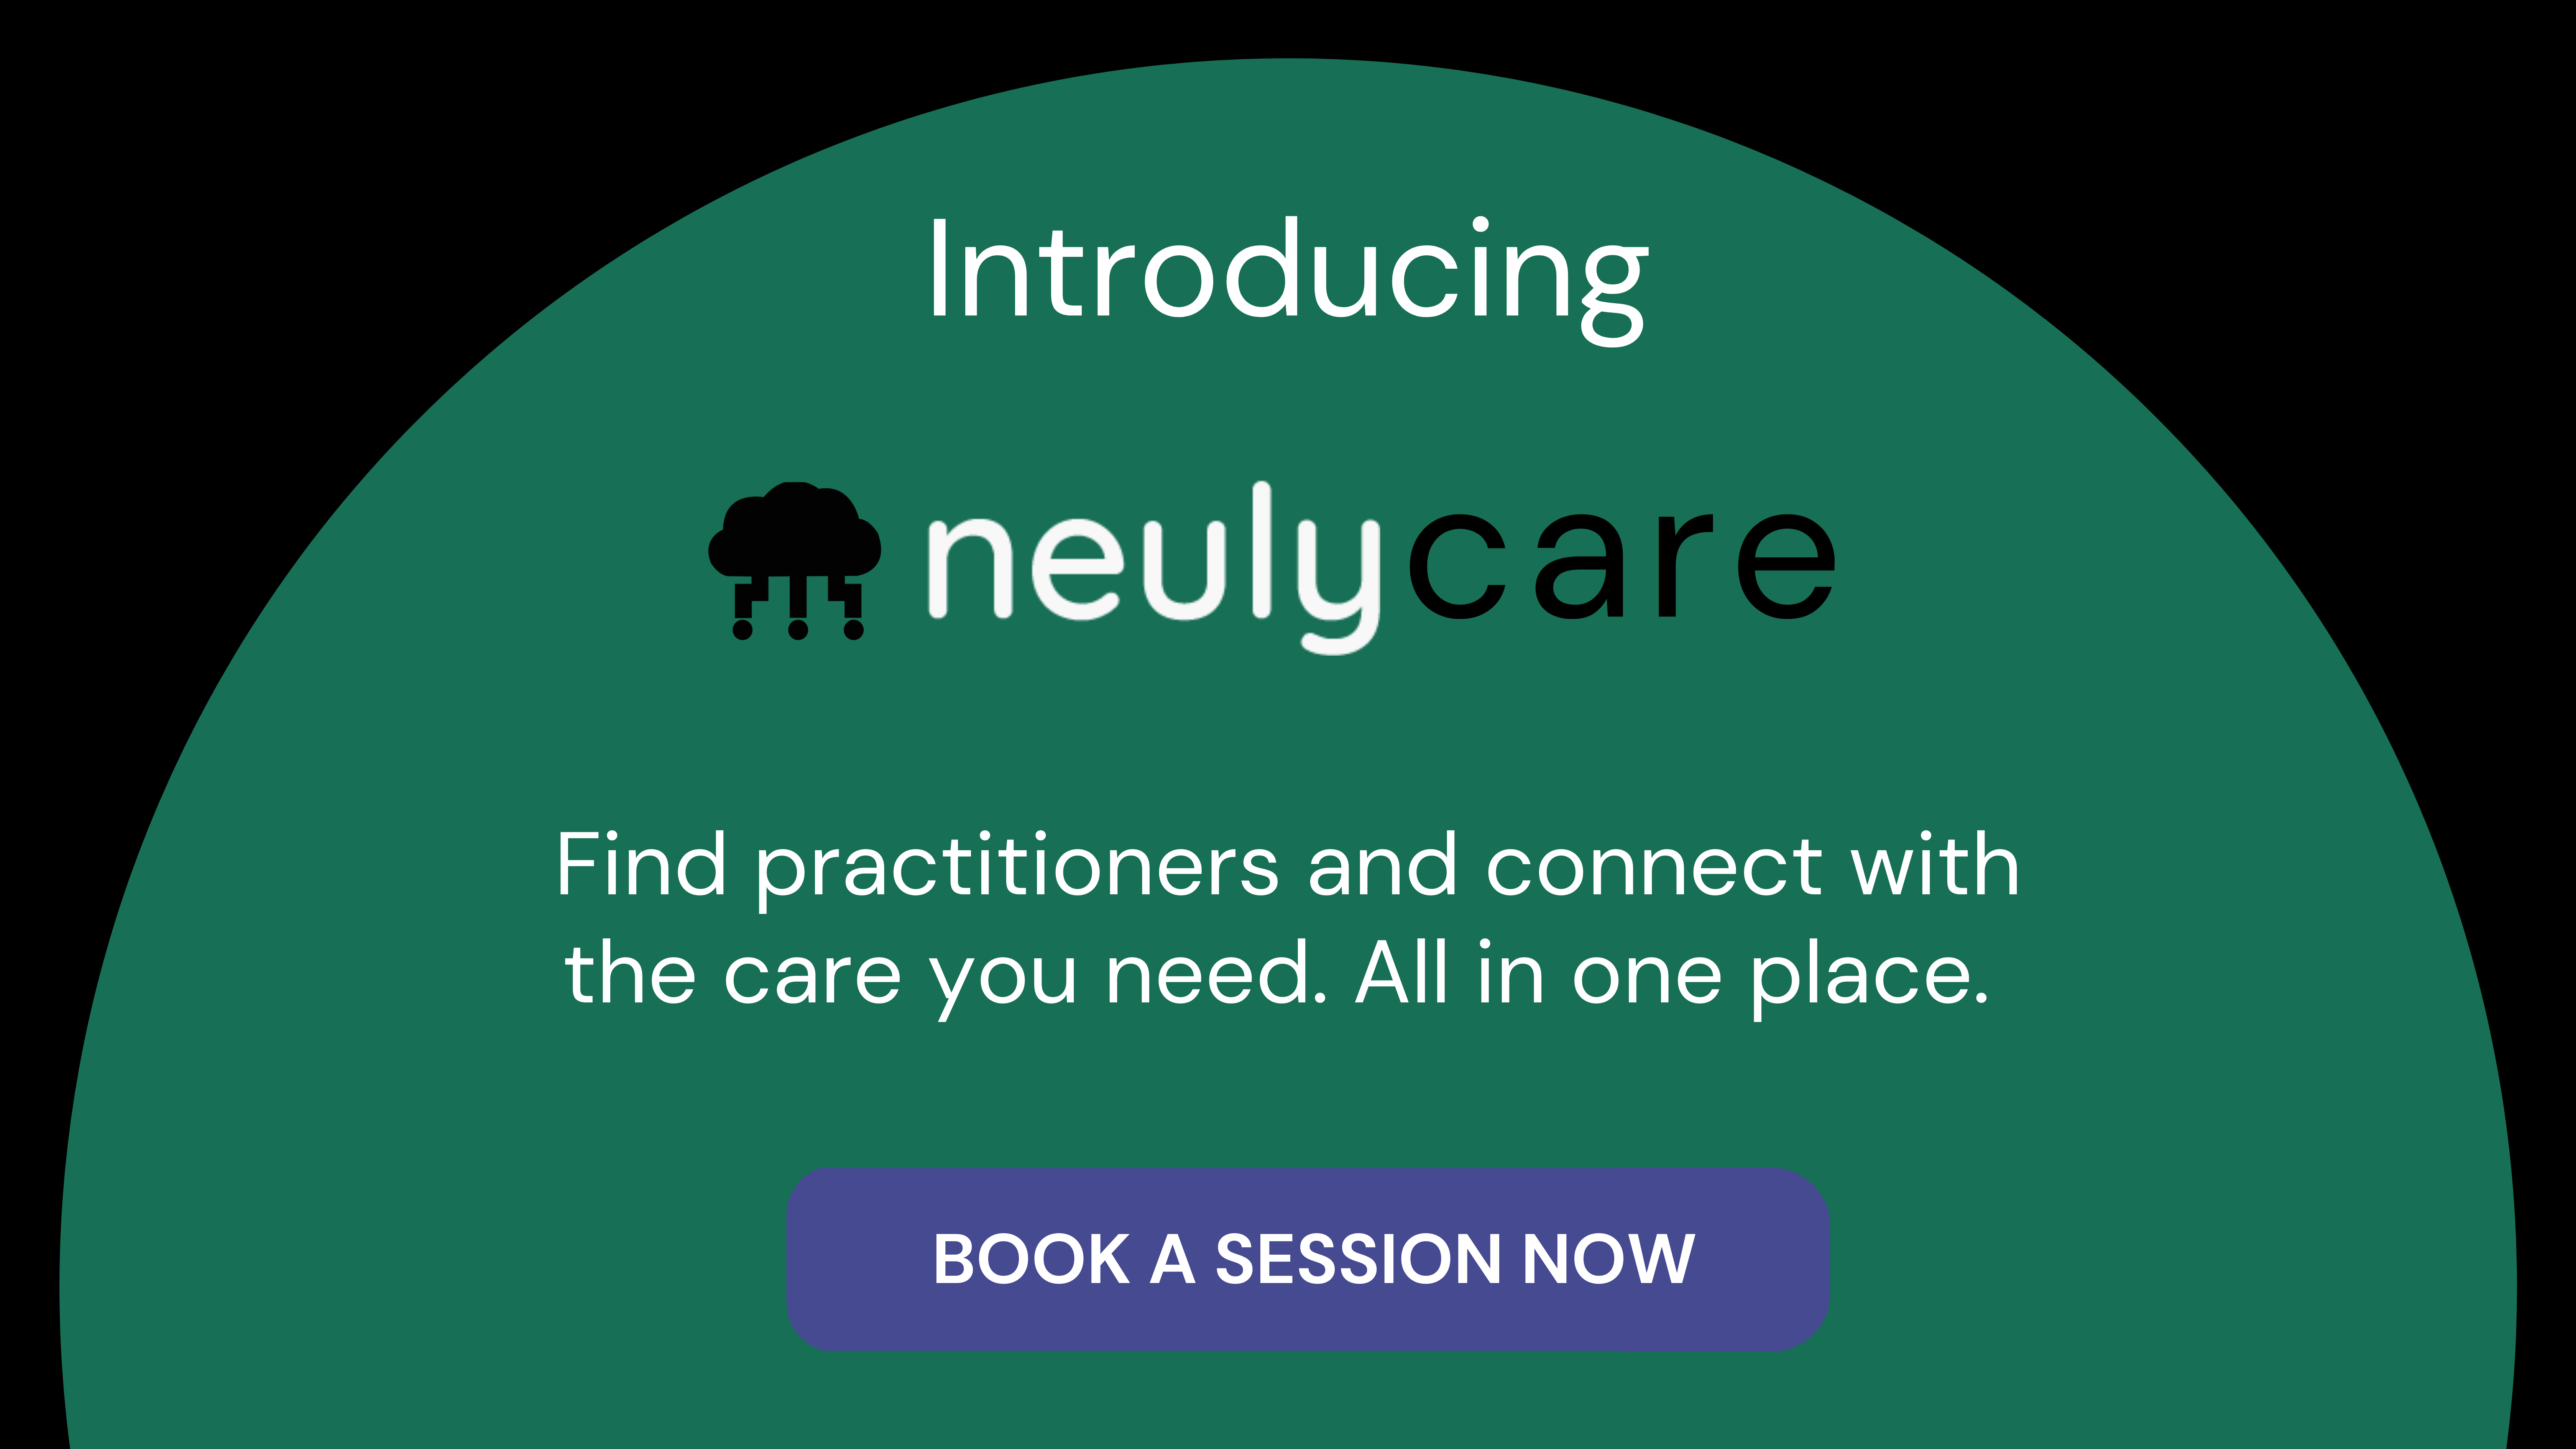 Find practitioners and connect with the care you need